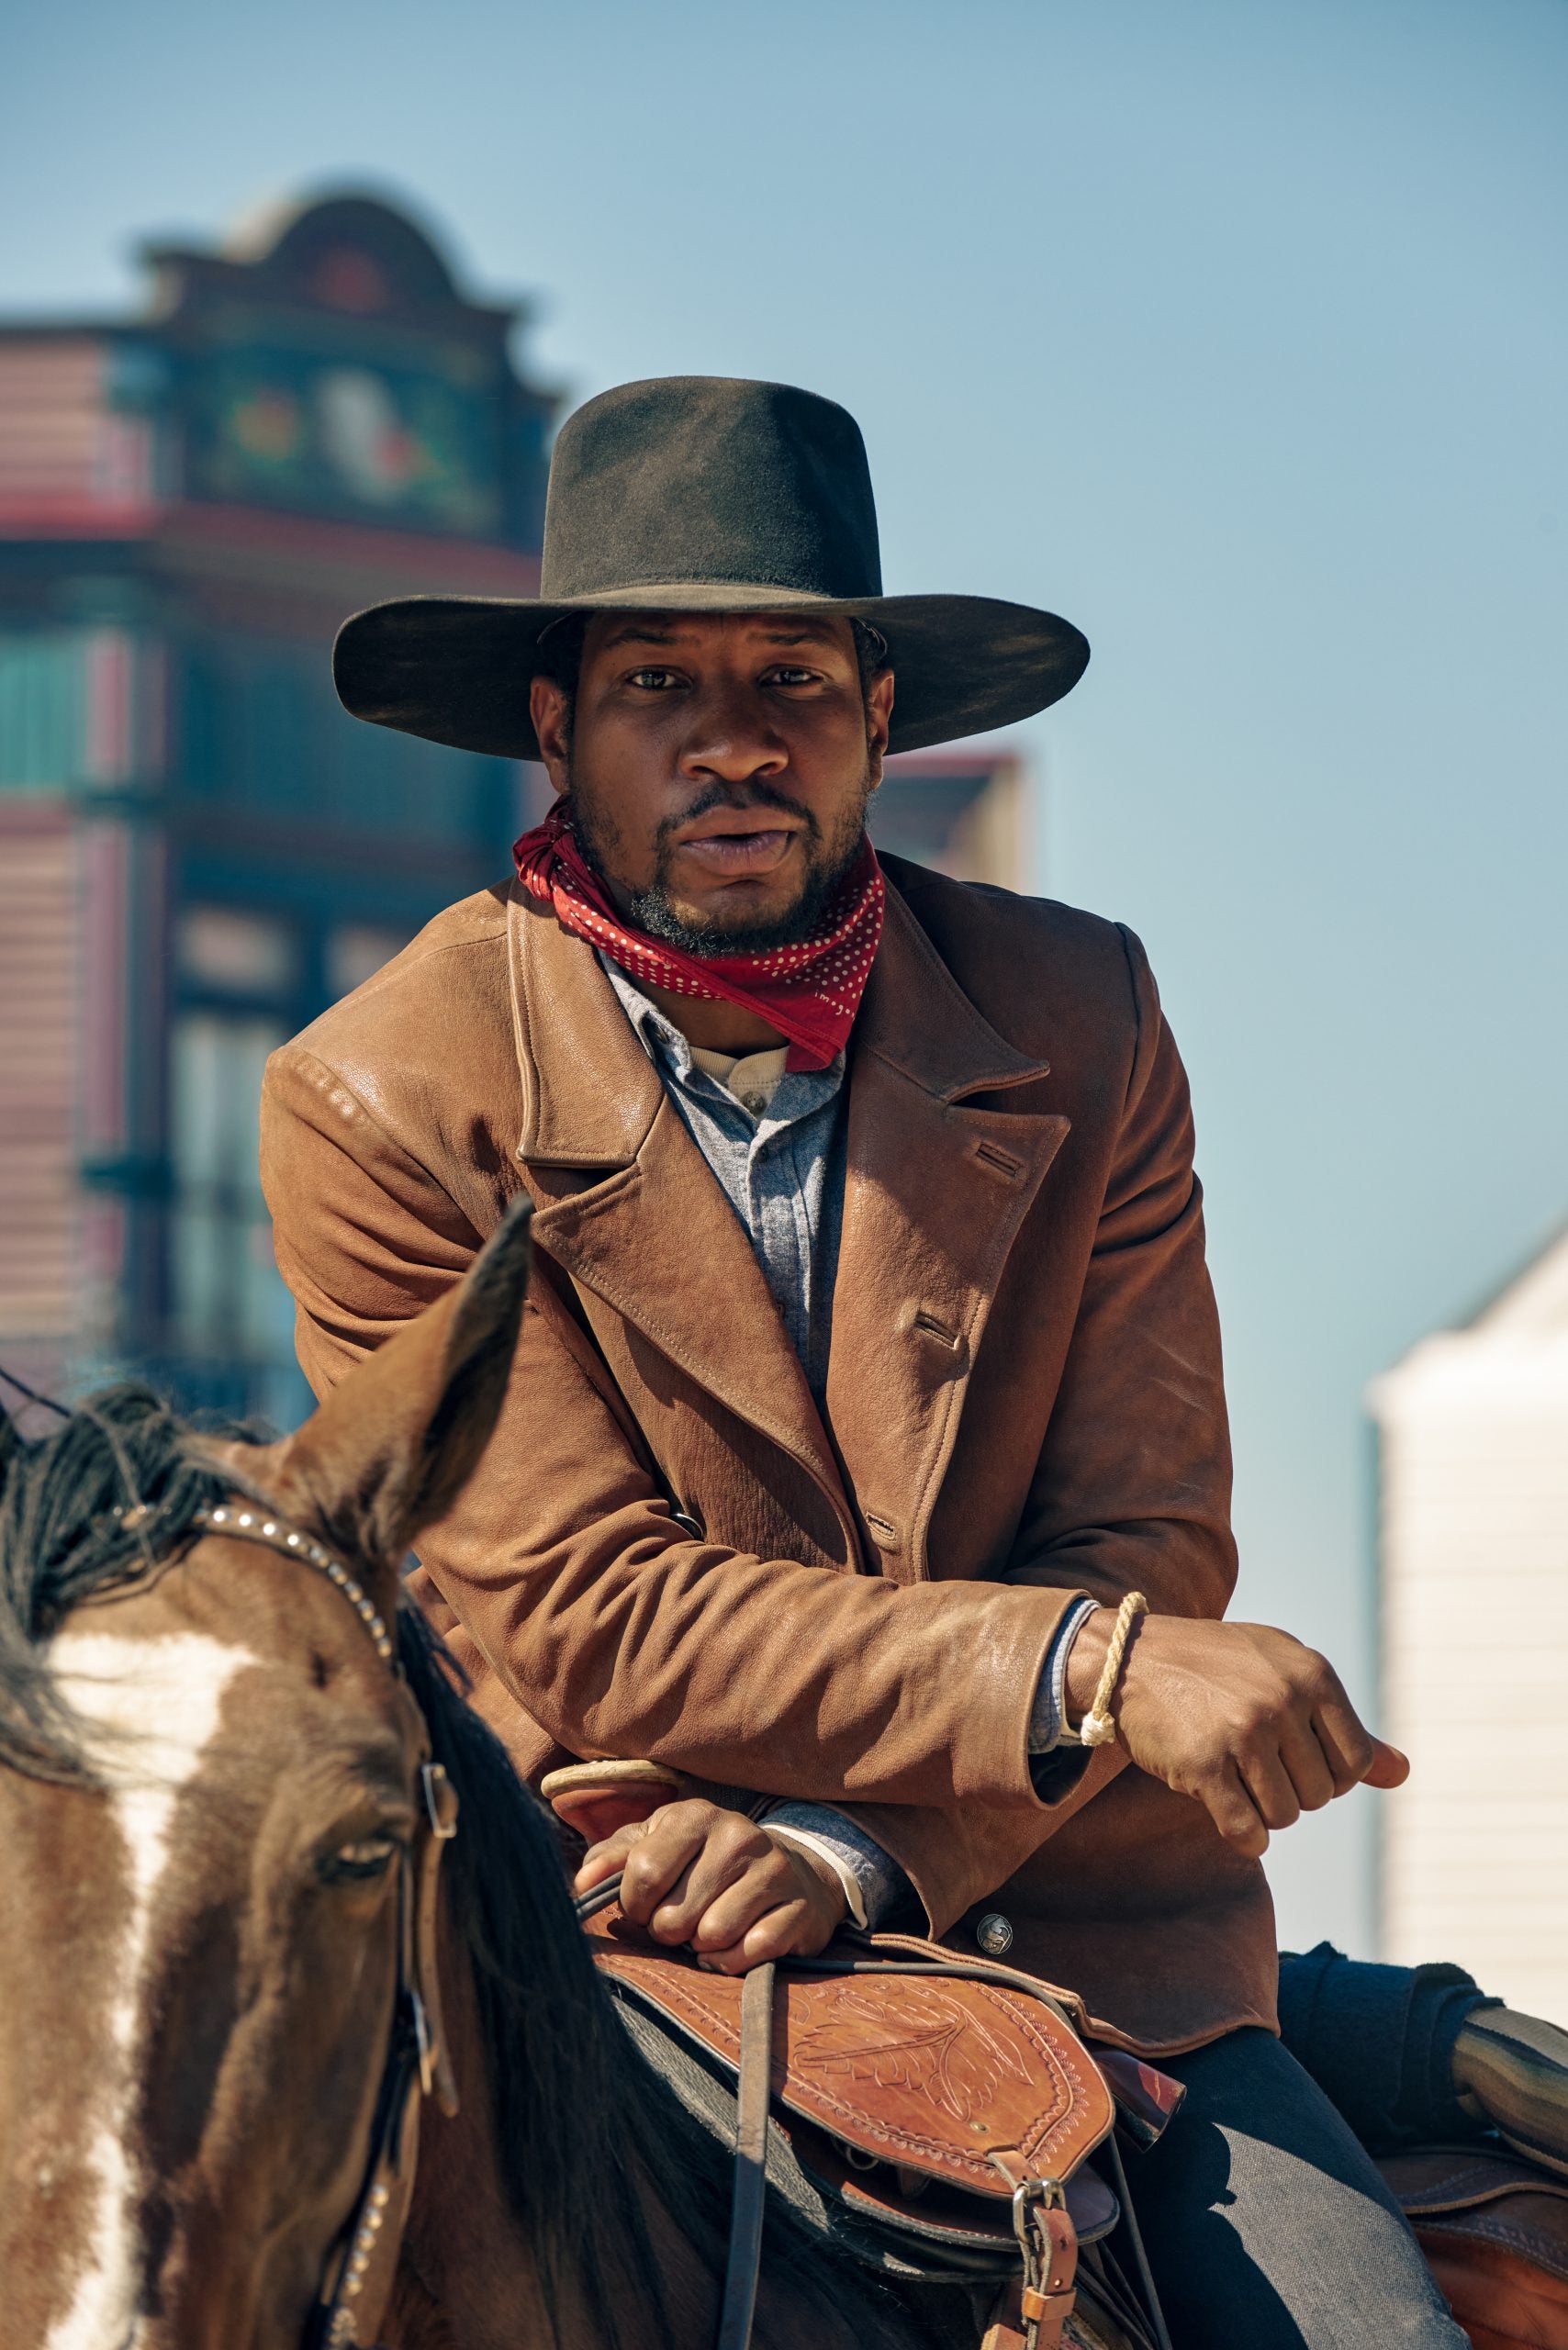 Meet The Real-Life Figures Depicted In The Black Western 'The Harder They Fall'